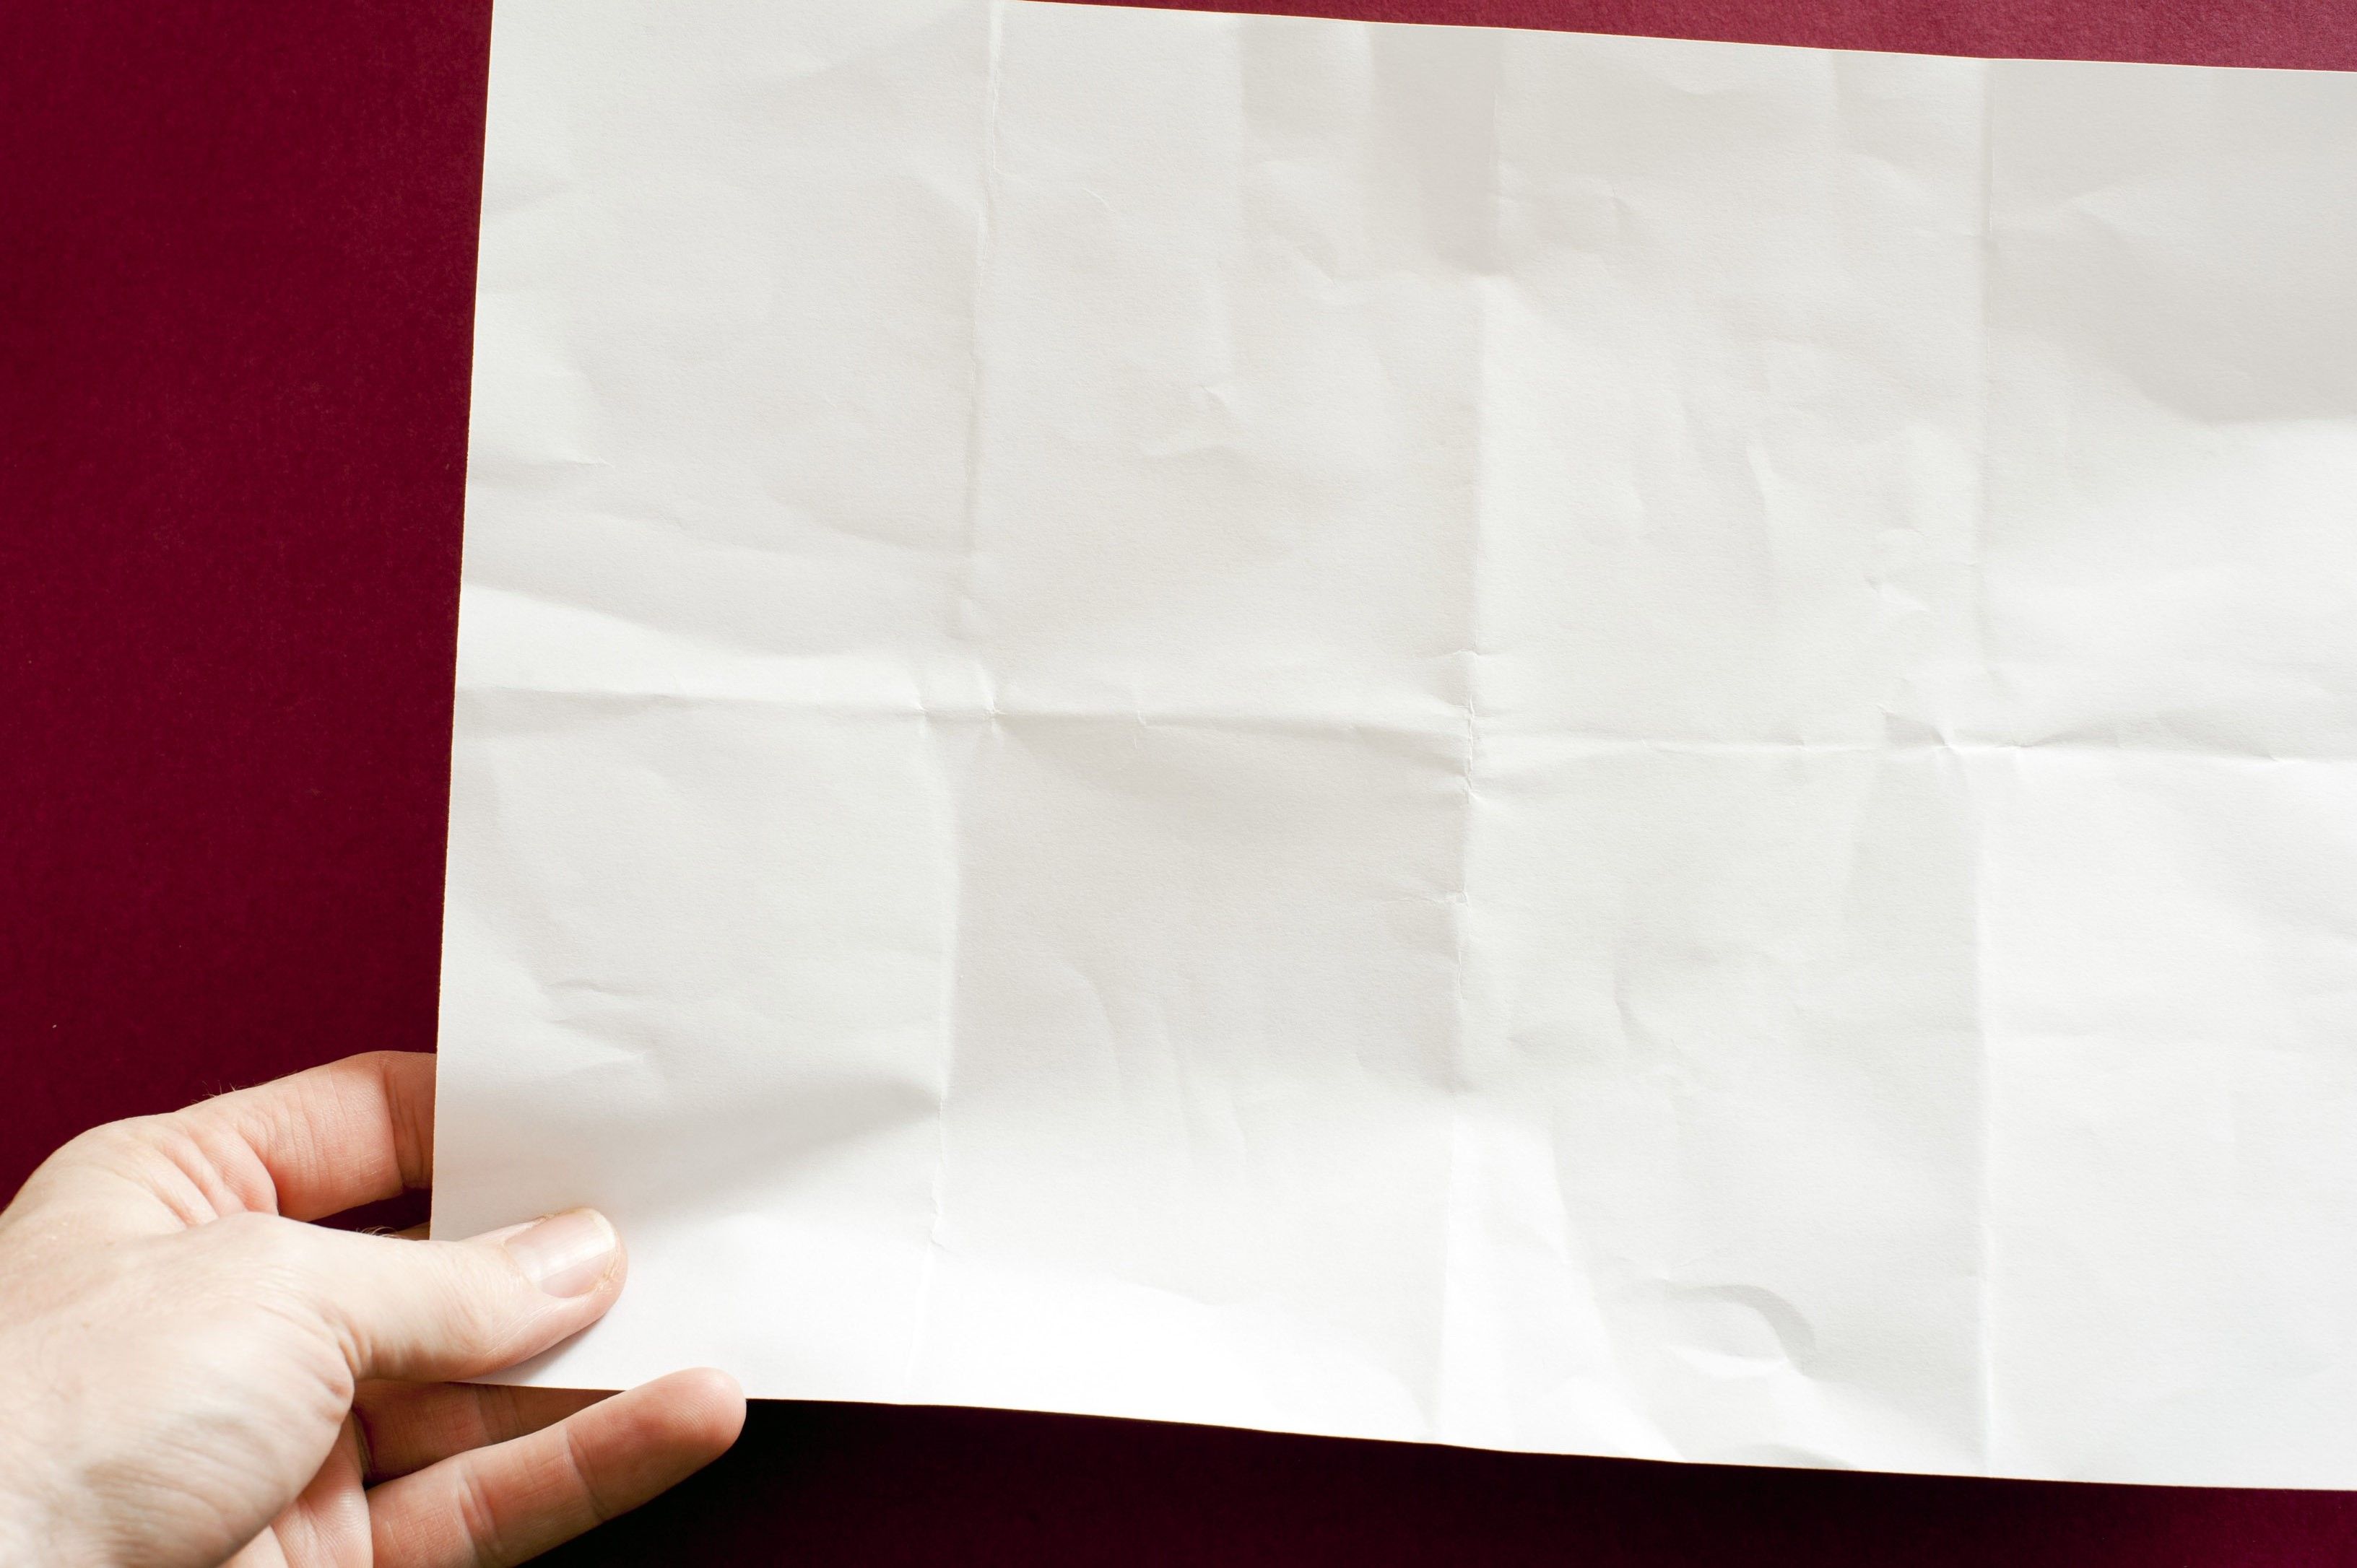 holding a blank paper. Free background and textures